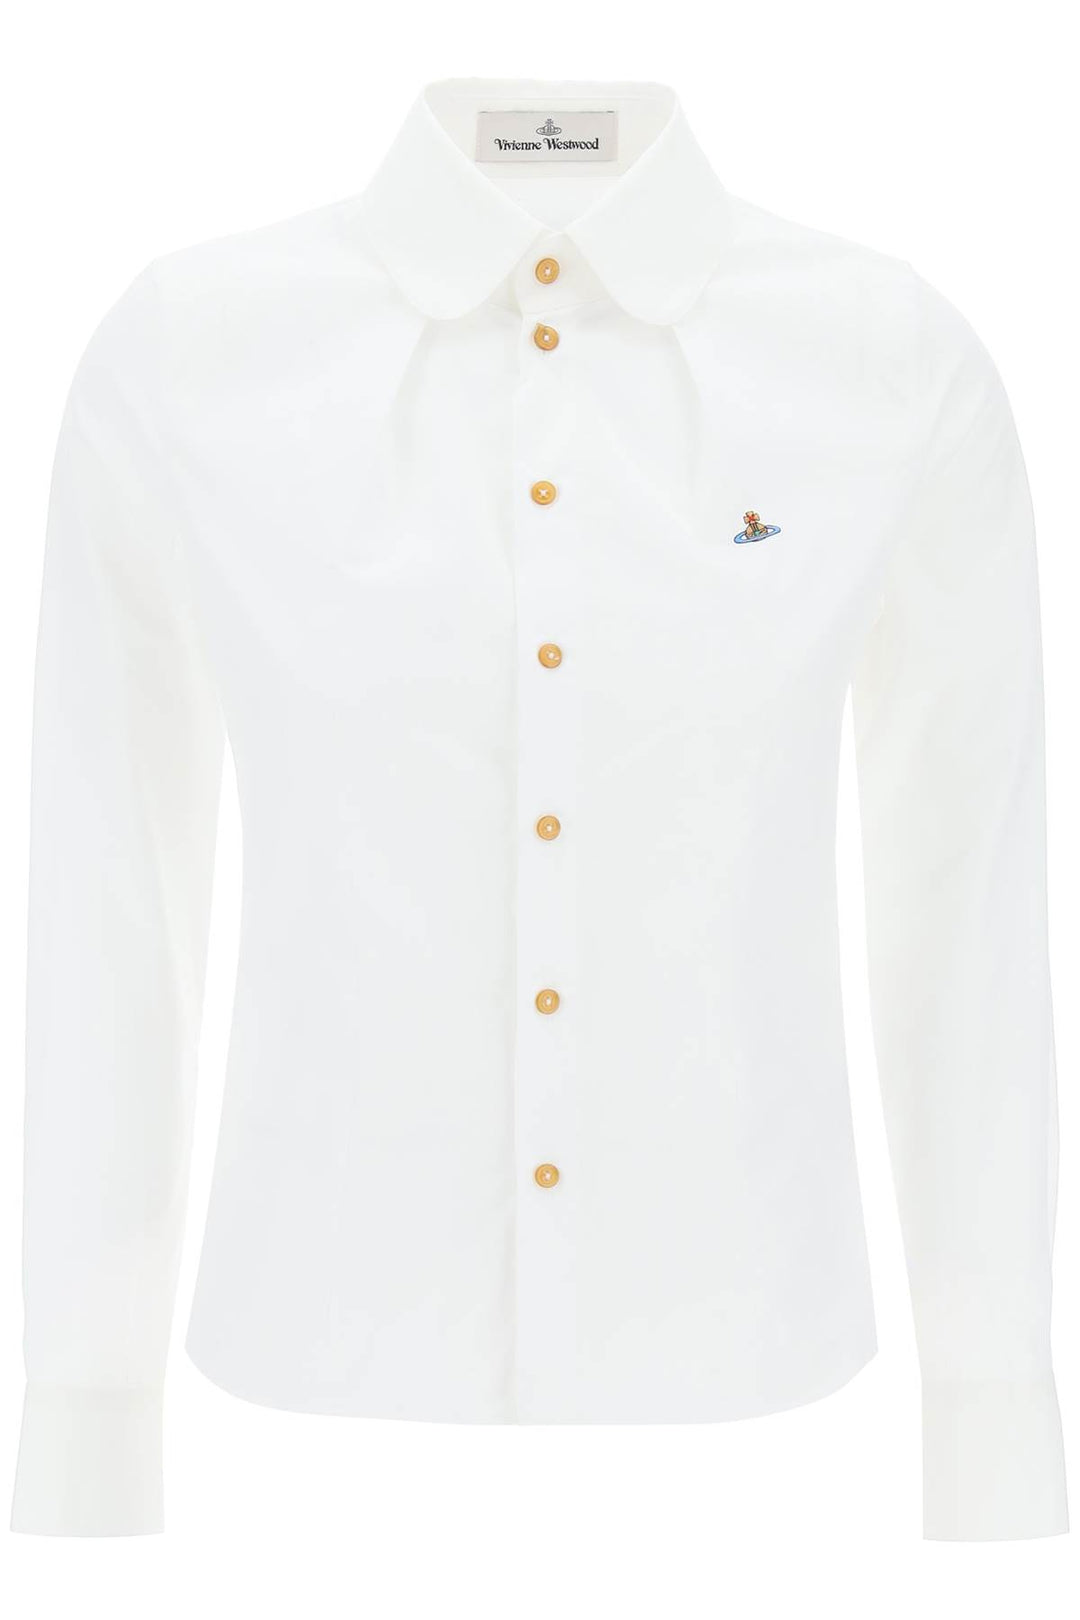 Vivienne Westwood Toulouse Shirt With Darts   Bianco